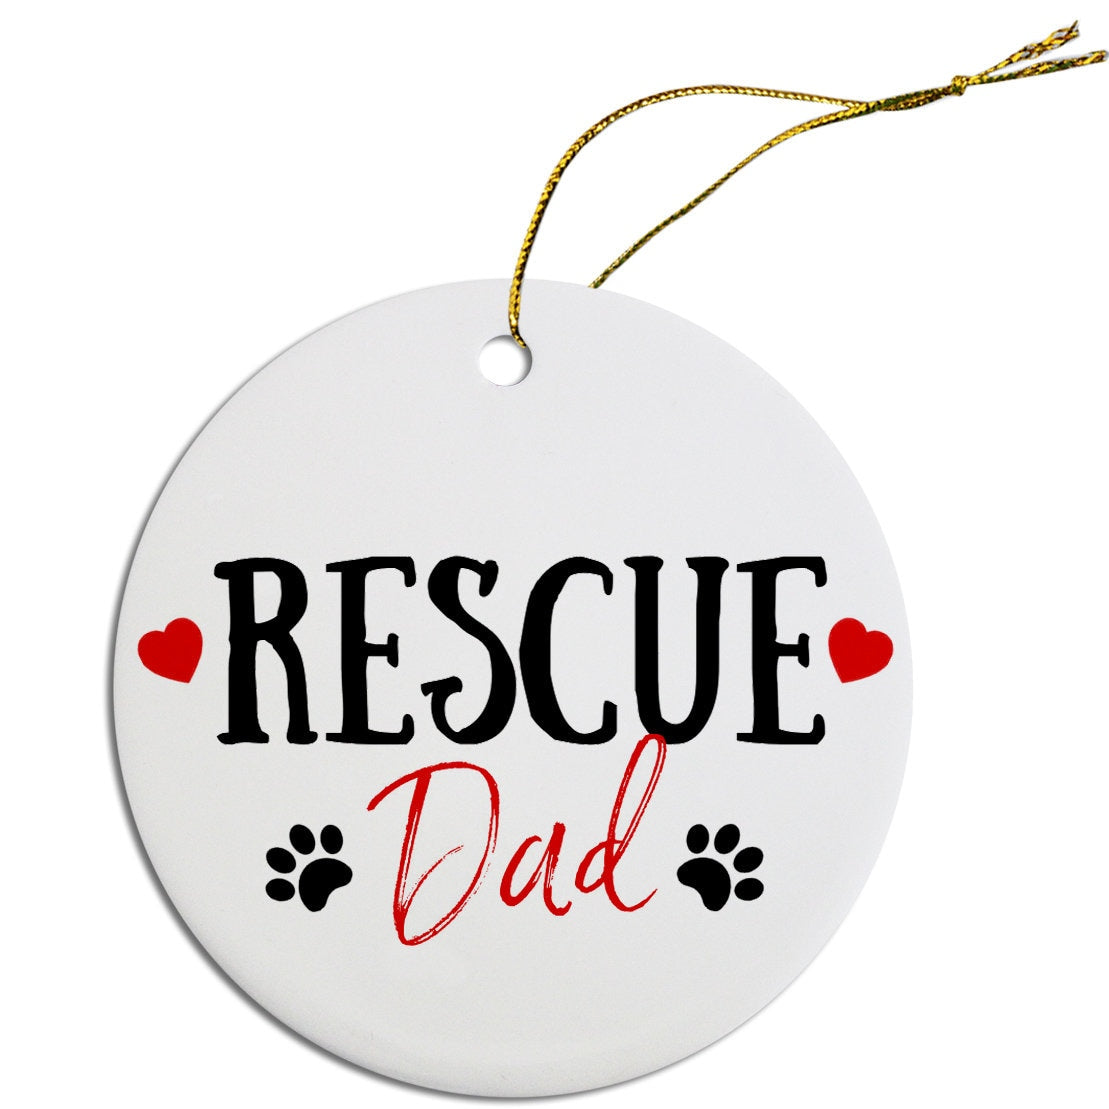 Holiday Fun Christmas Ornaments (Choose from 4 designs: Rescue Mom, Rescue Dad, Who Rescued Who?, You Can't Buy Love, But You Can Rescue It)